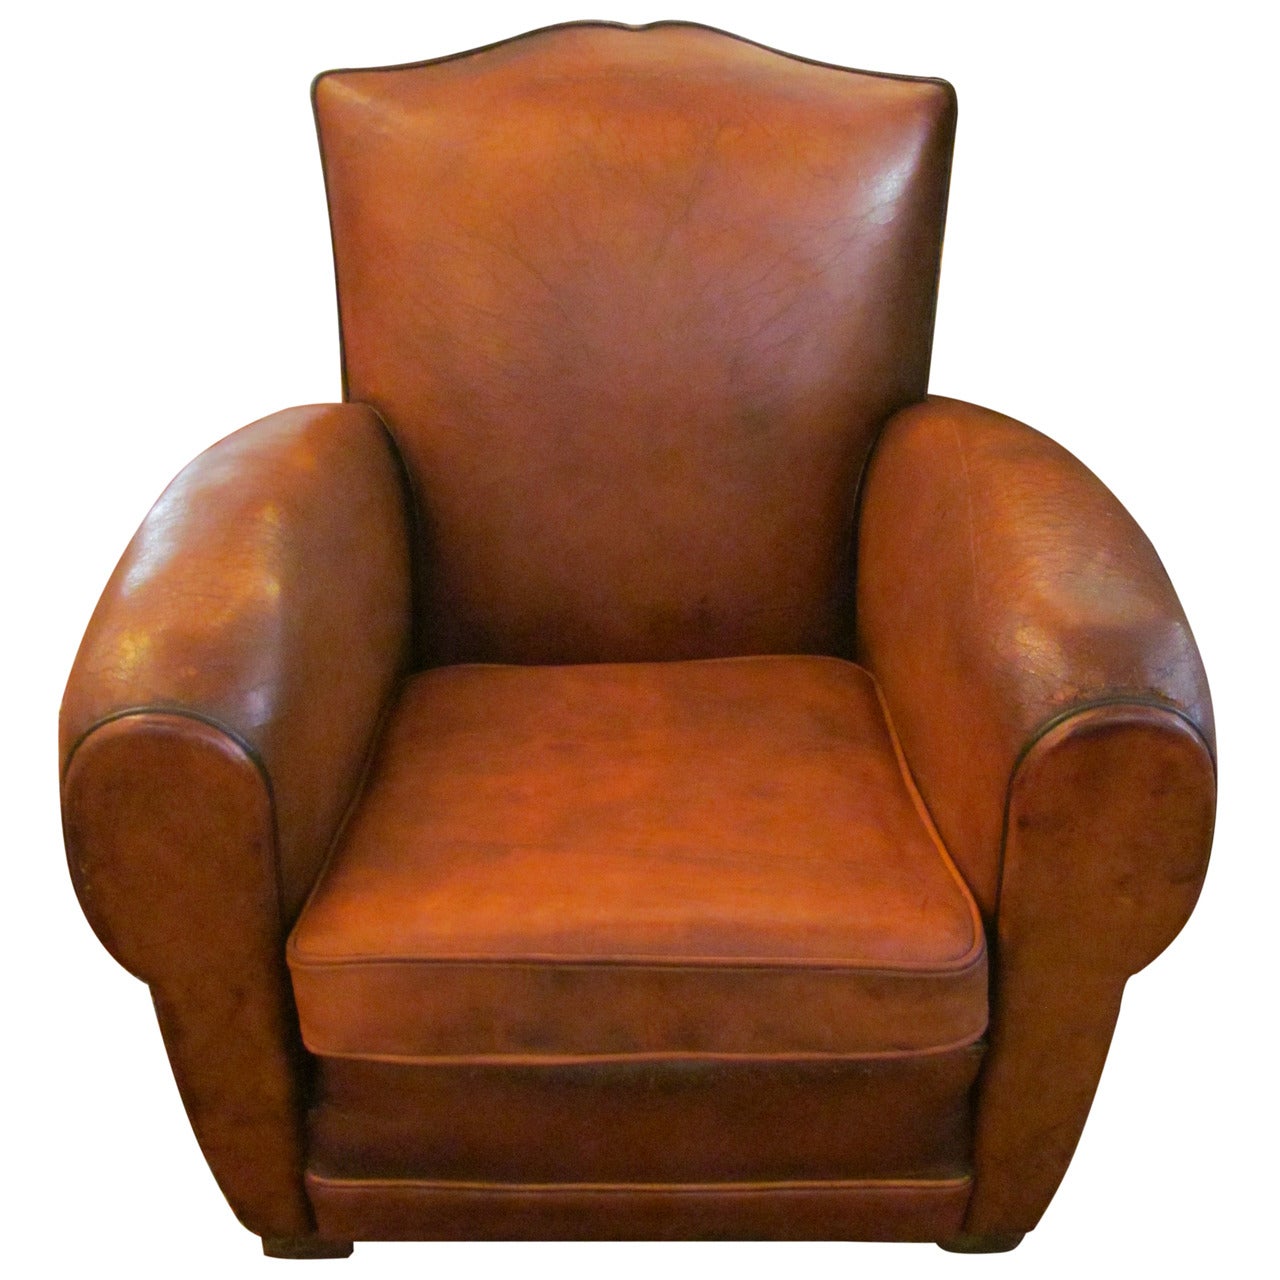 Single Mustache Back Leather Club Chair